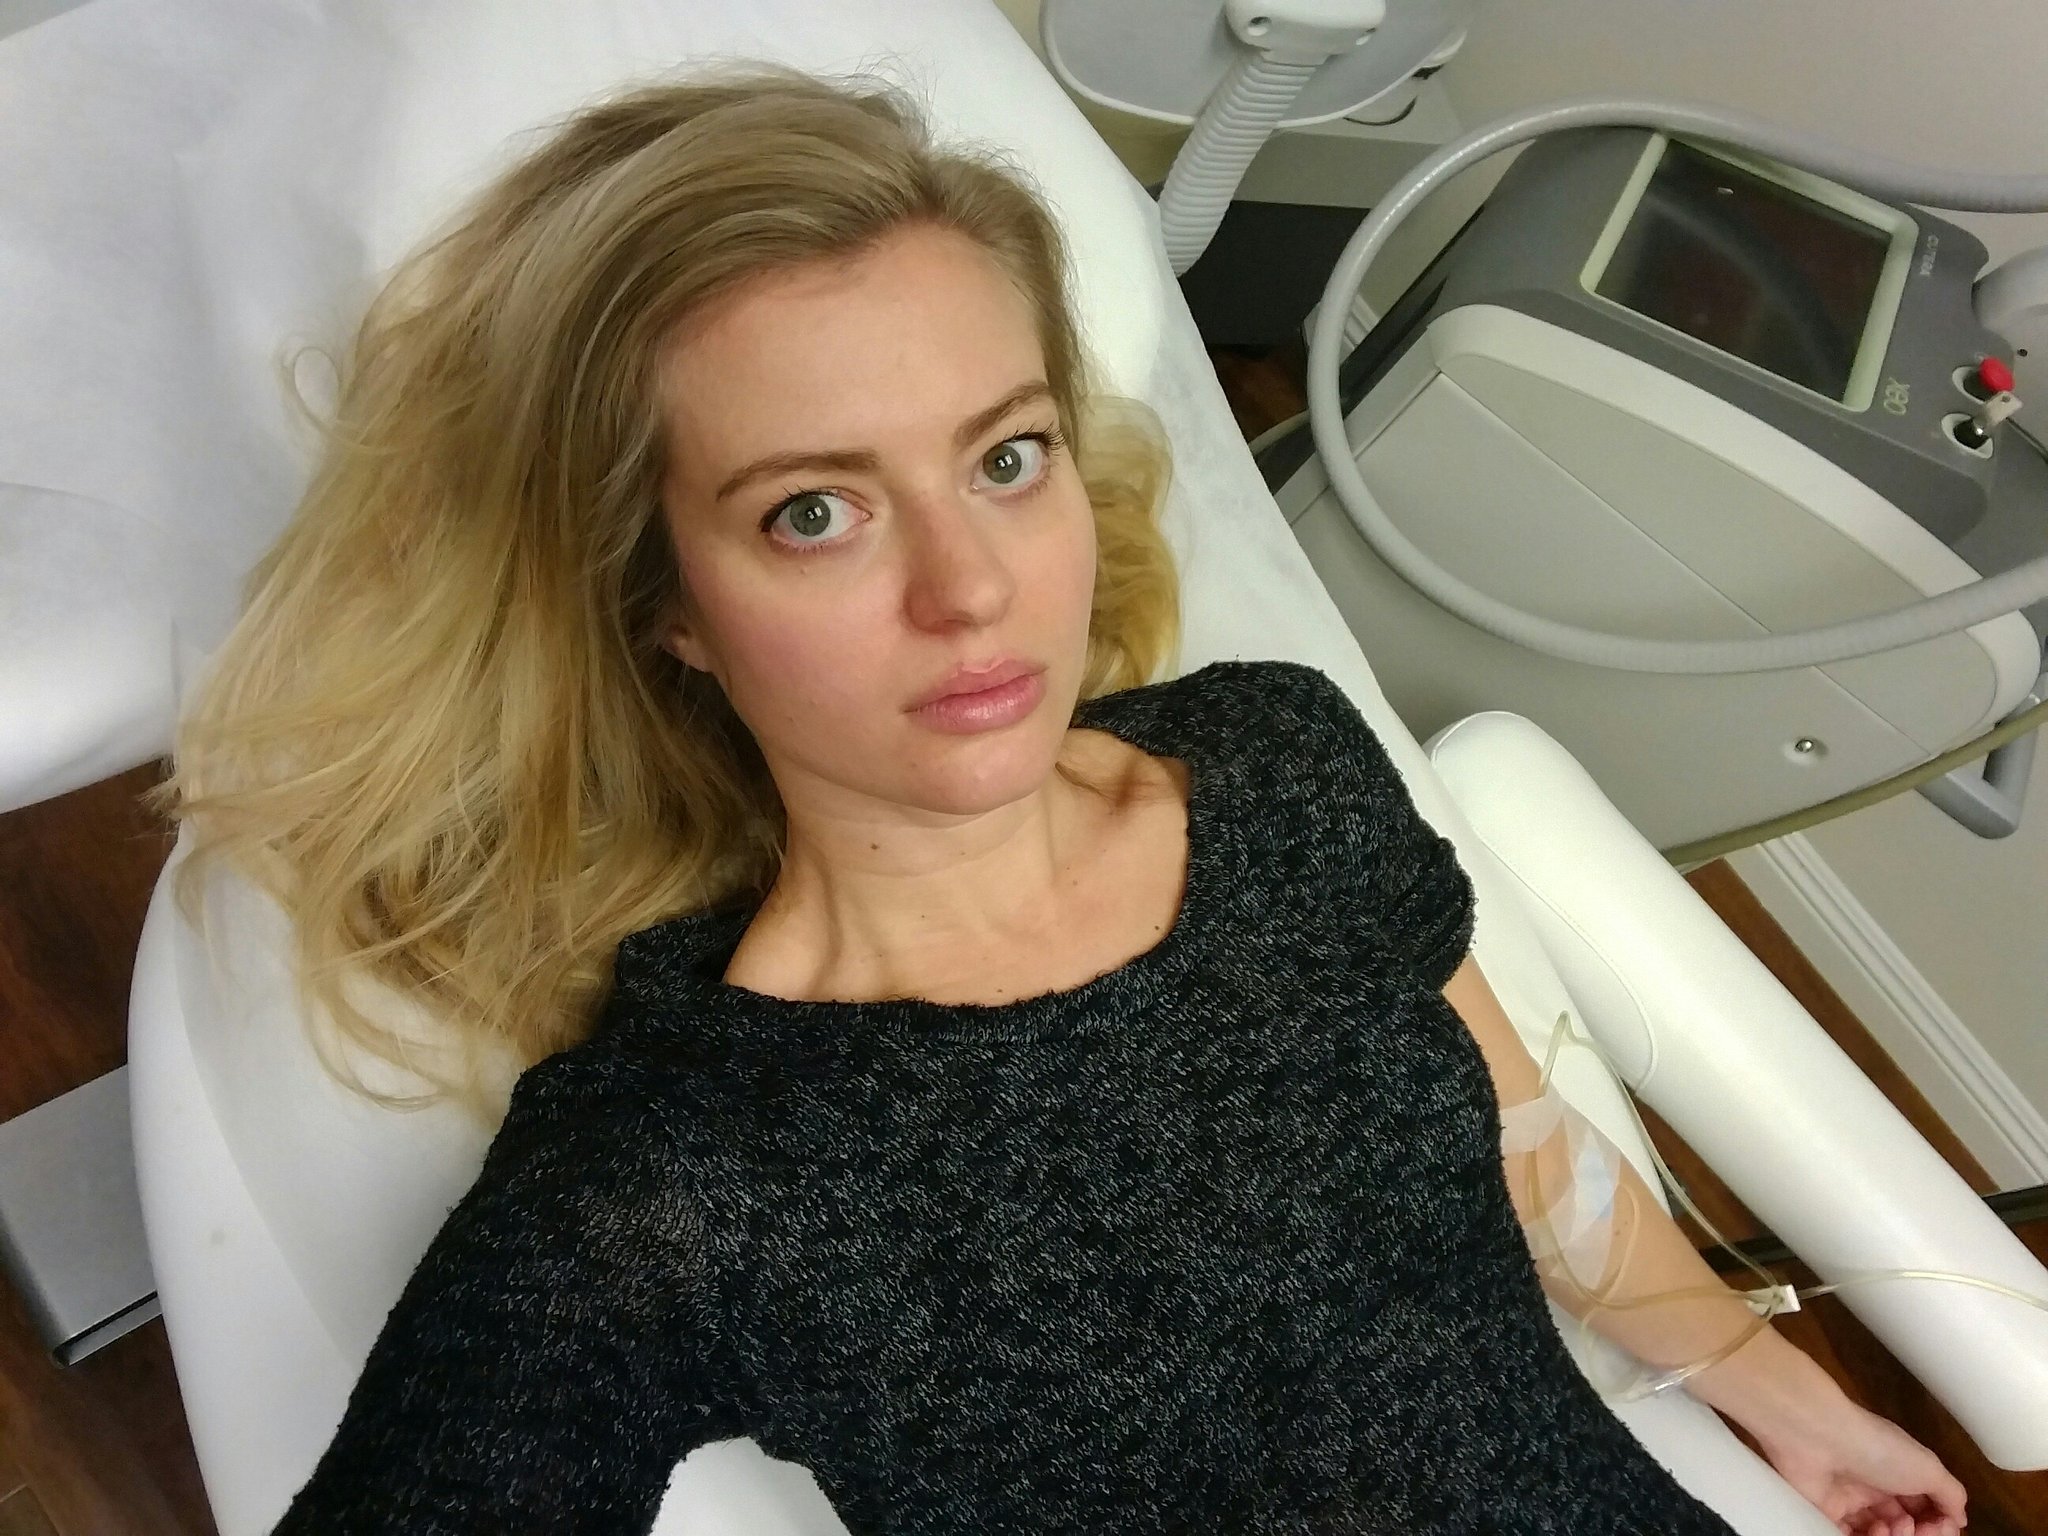 Elyse Willems on Twitter.